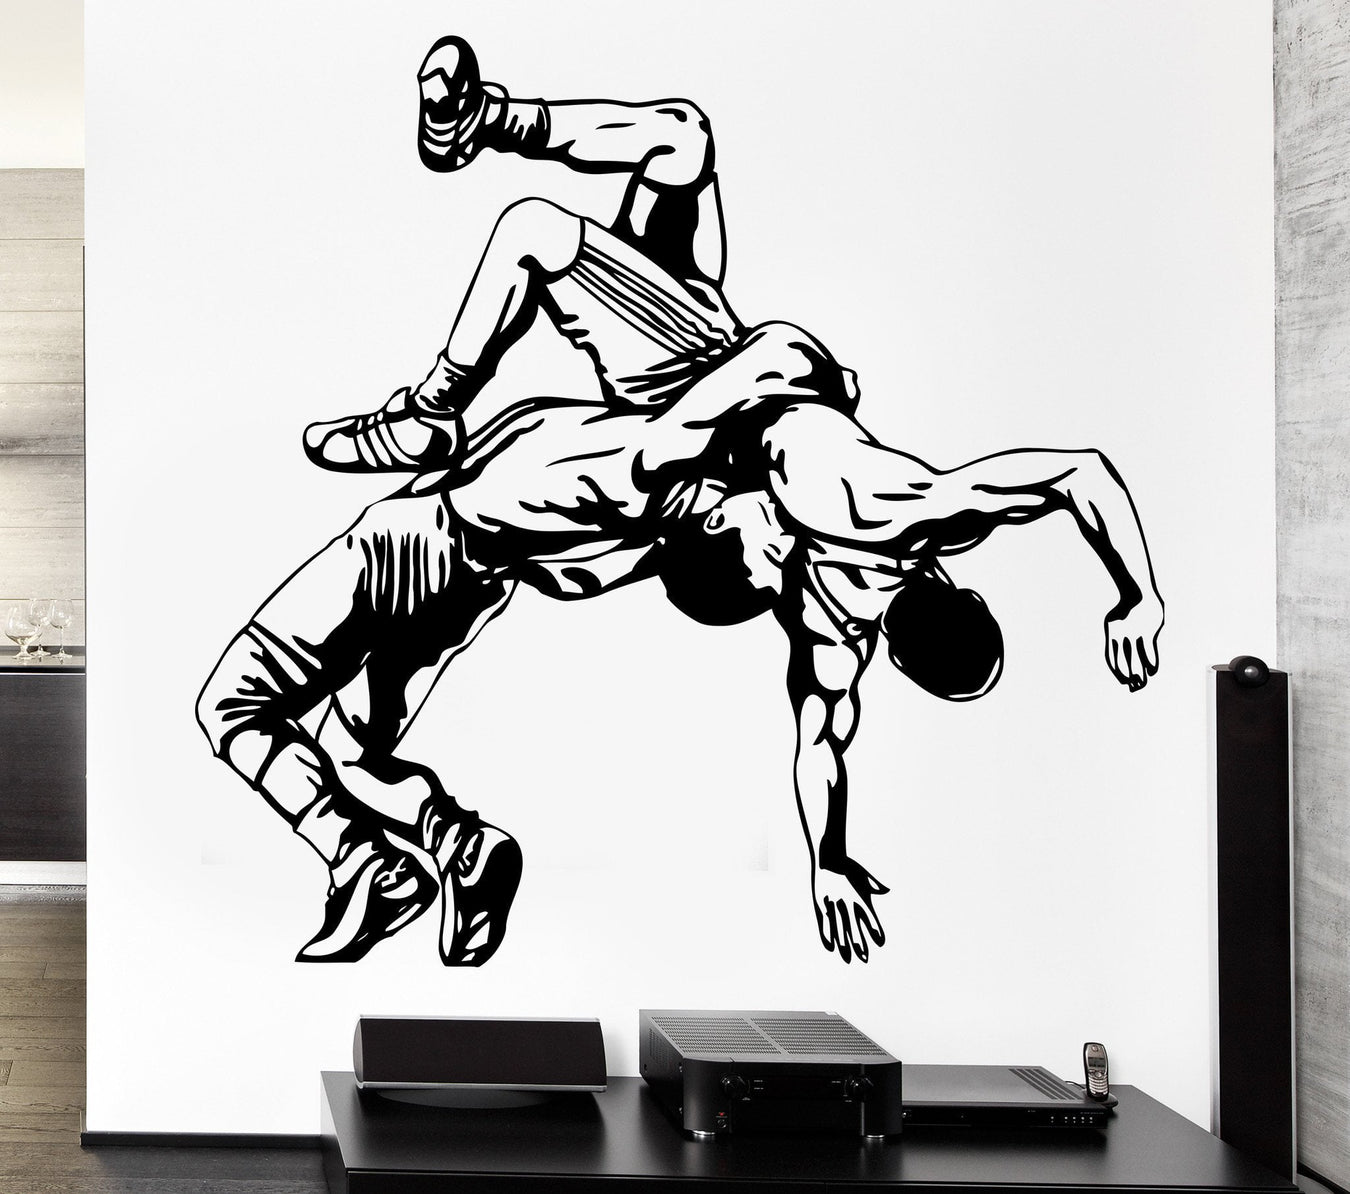 Wrestling Wall Decals